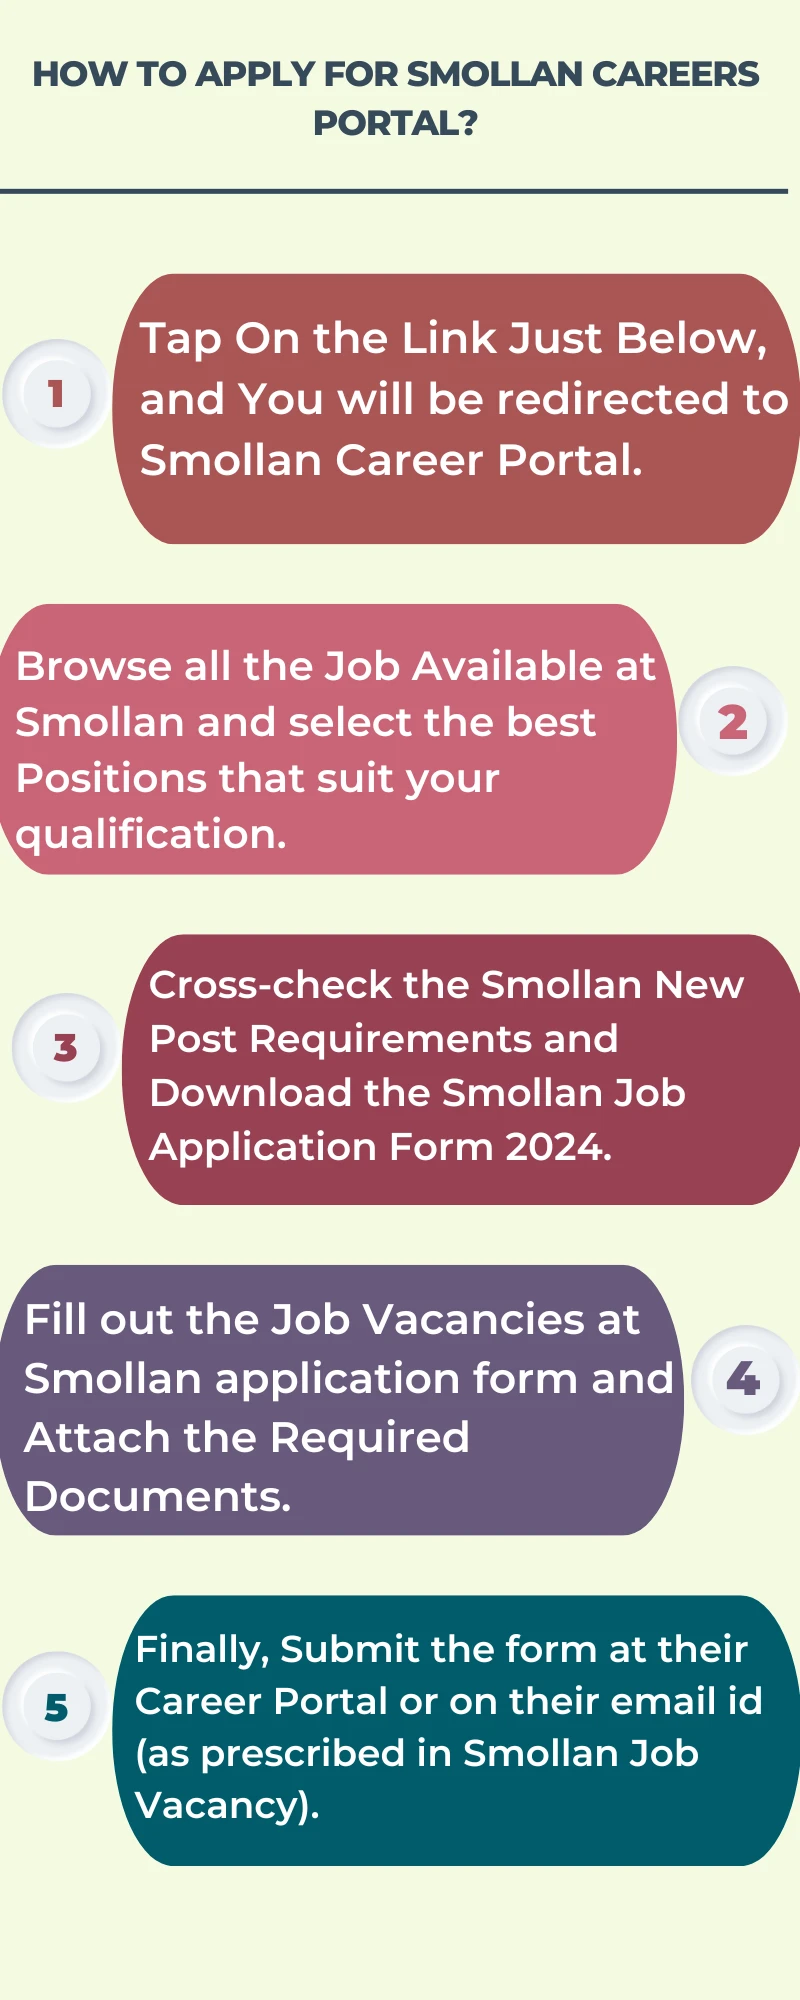 How To Apply for Smollan Careers Portal?